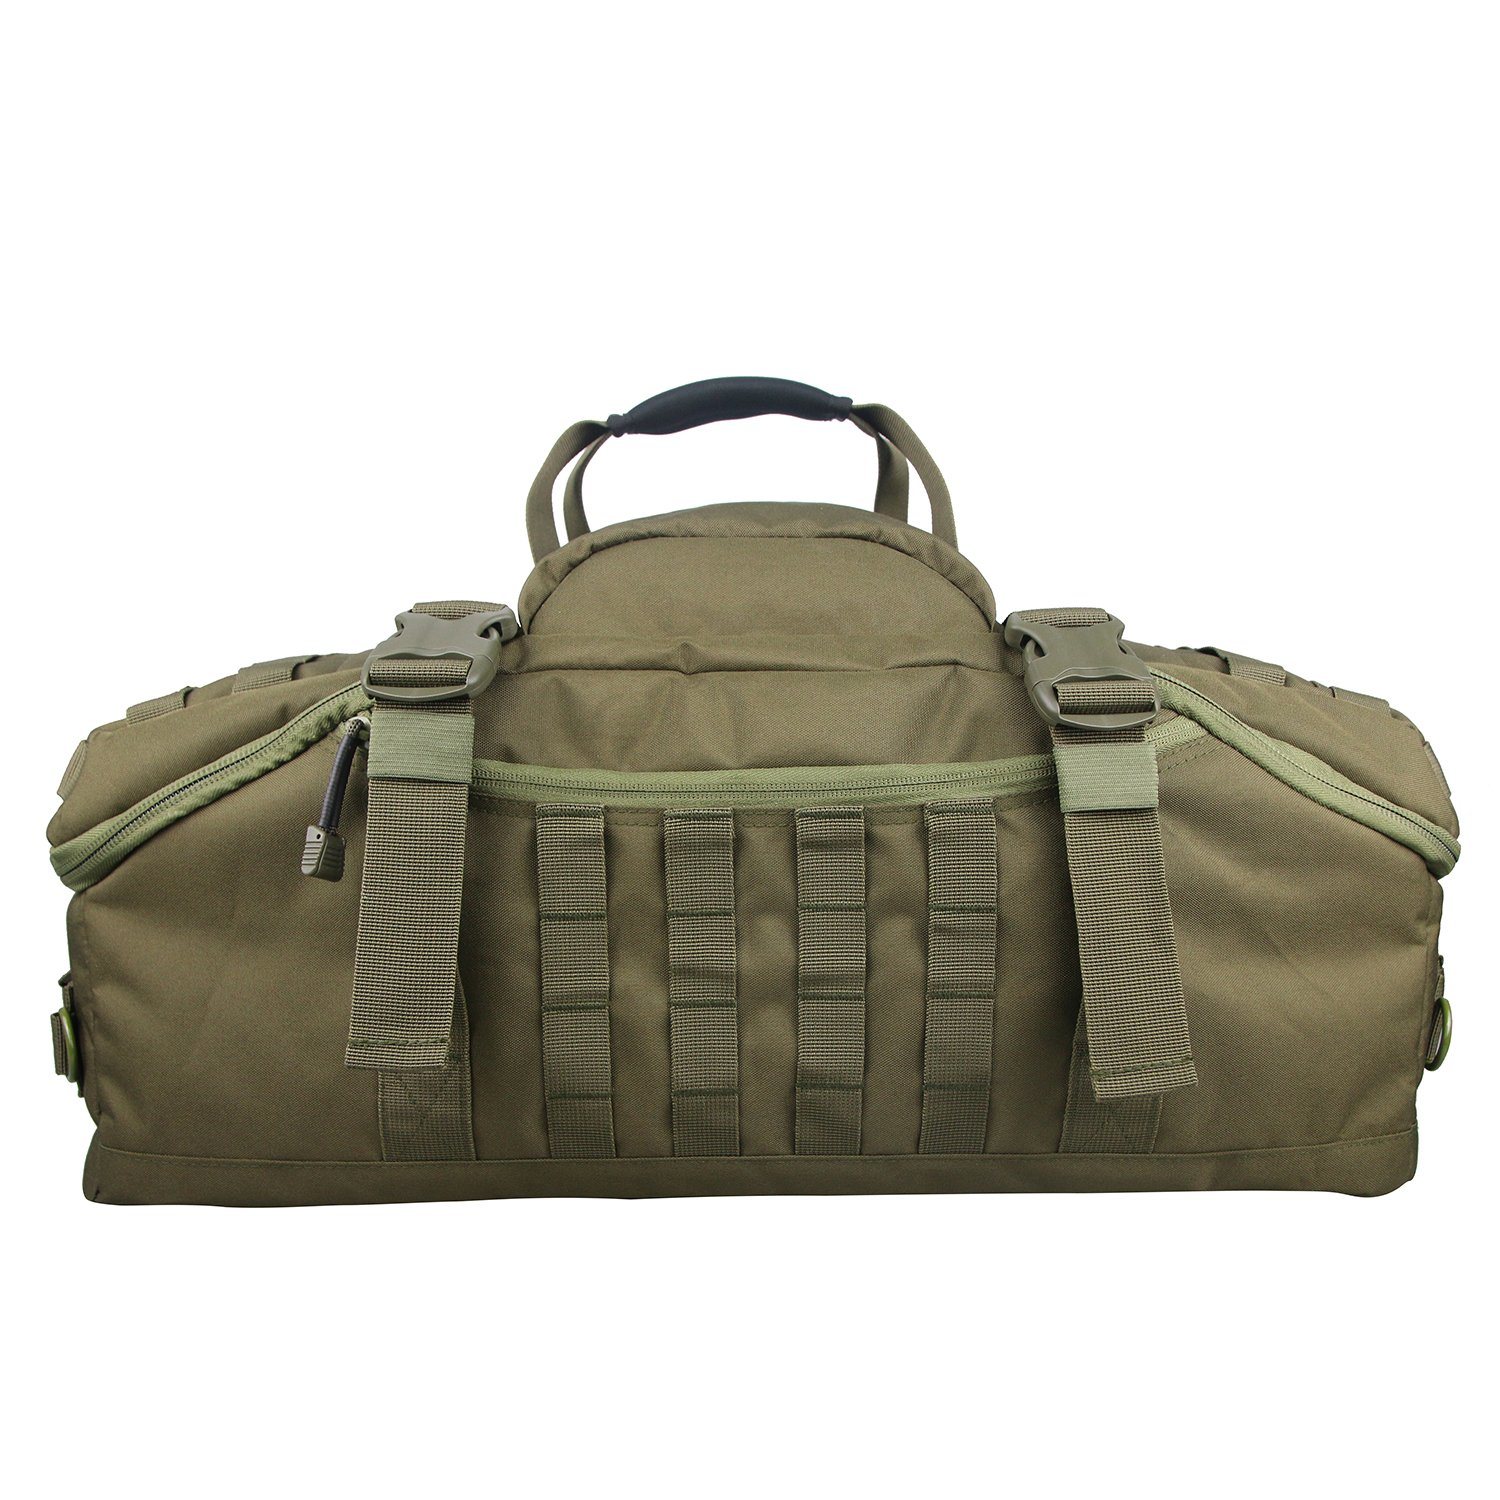 Tactical Military Duffel Backpack with Shoulder Strap Travel Hunting Mountain Outdoor Sports Luggage Bag